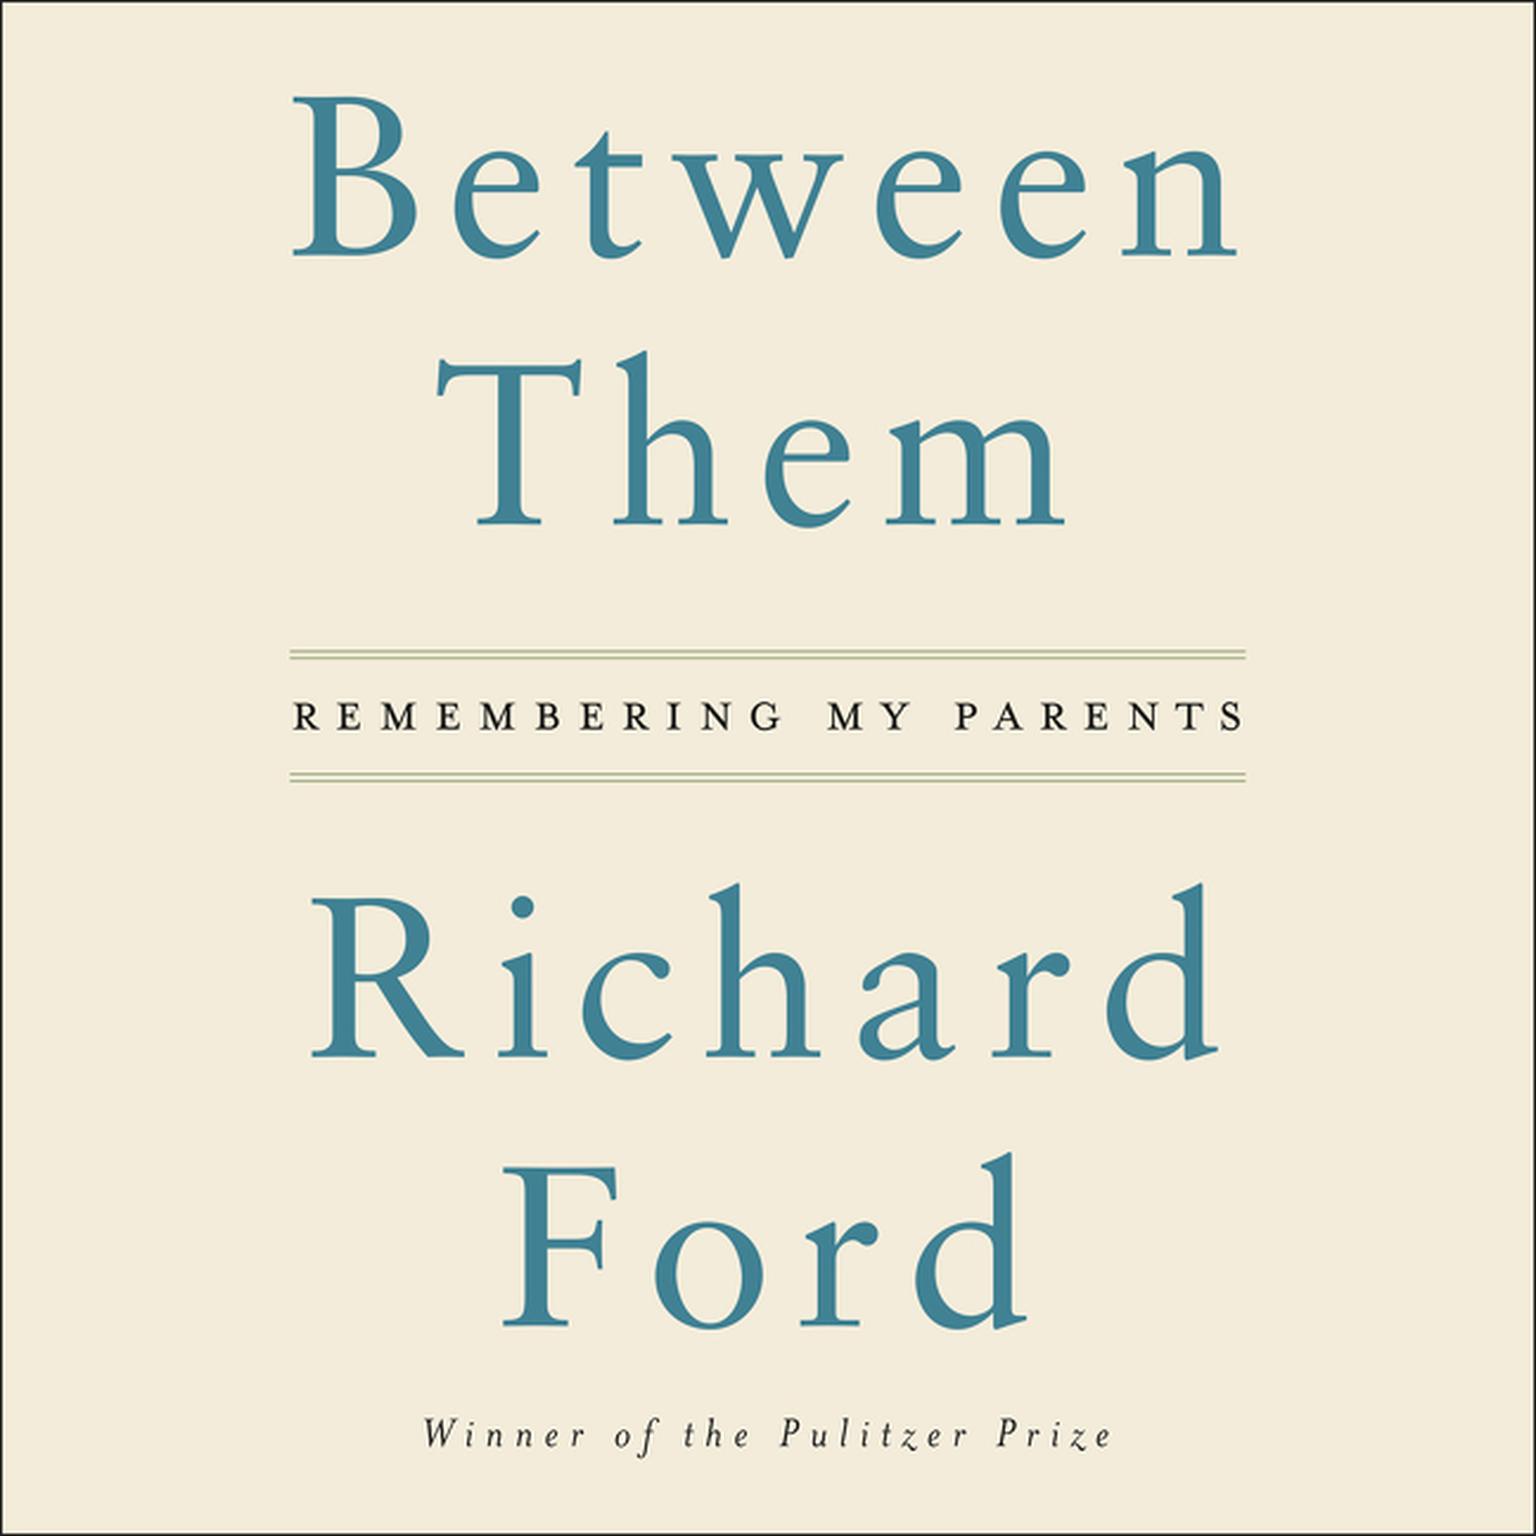 Between Them: Remembering My Parents Audiobook, by Richard Ford